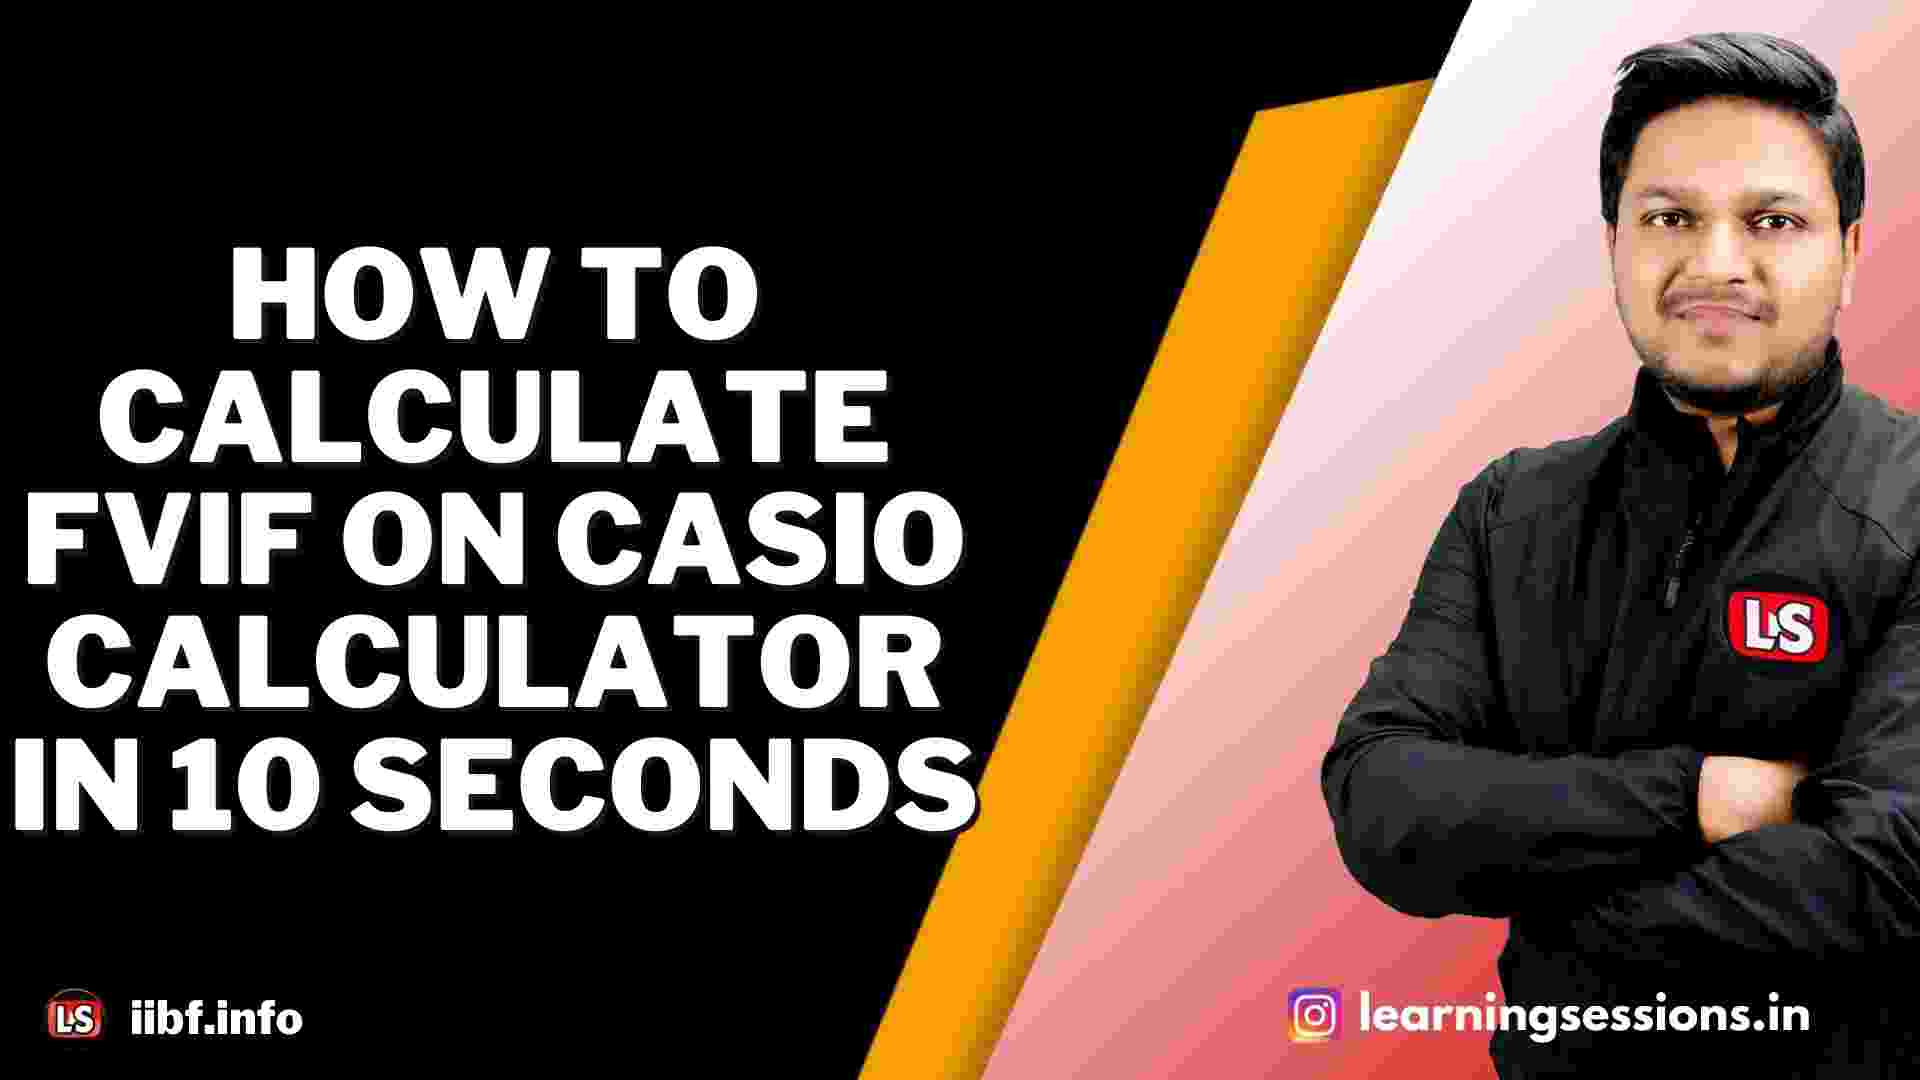 How to Calculate FVIF on CASIO Calculator in 10 Seconds